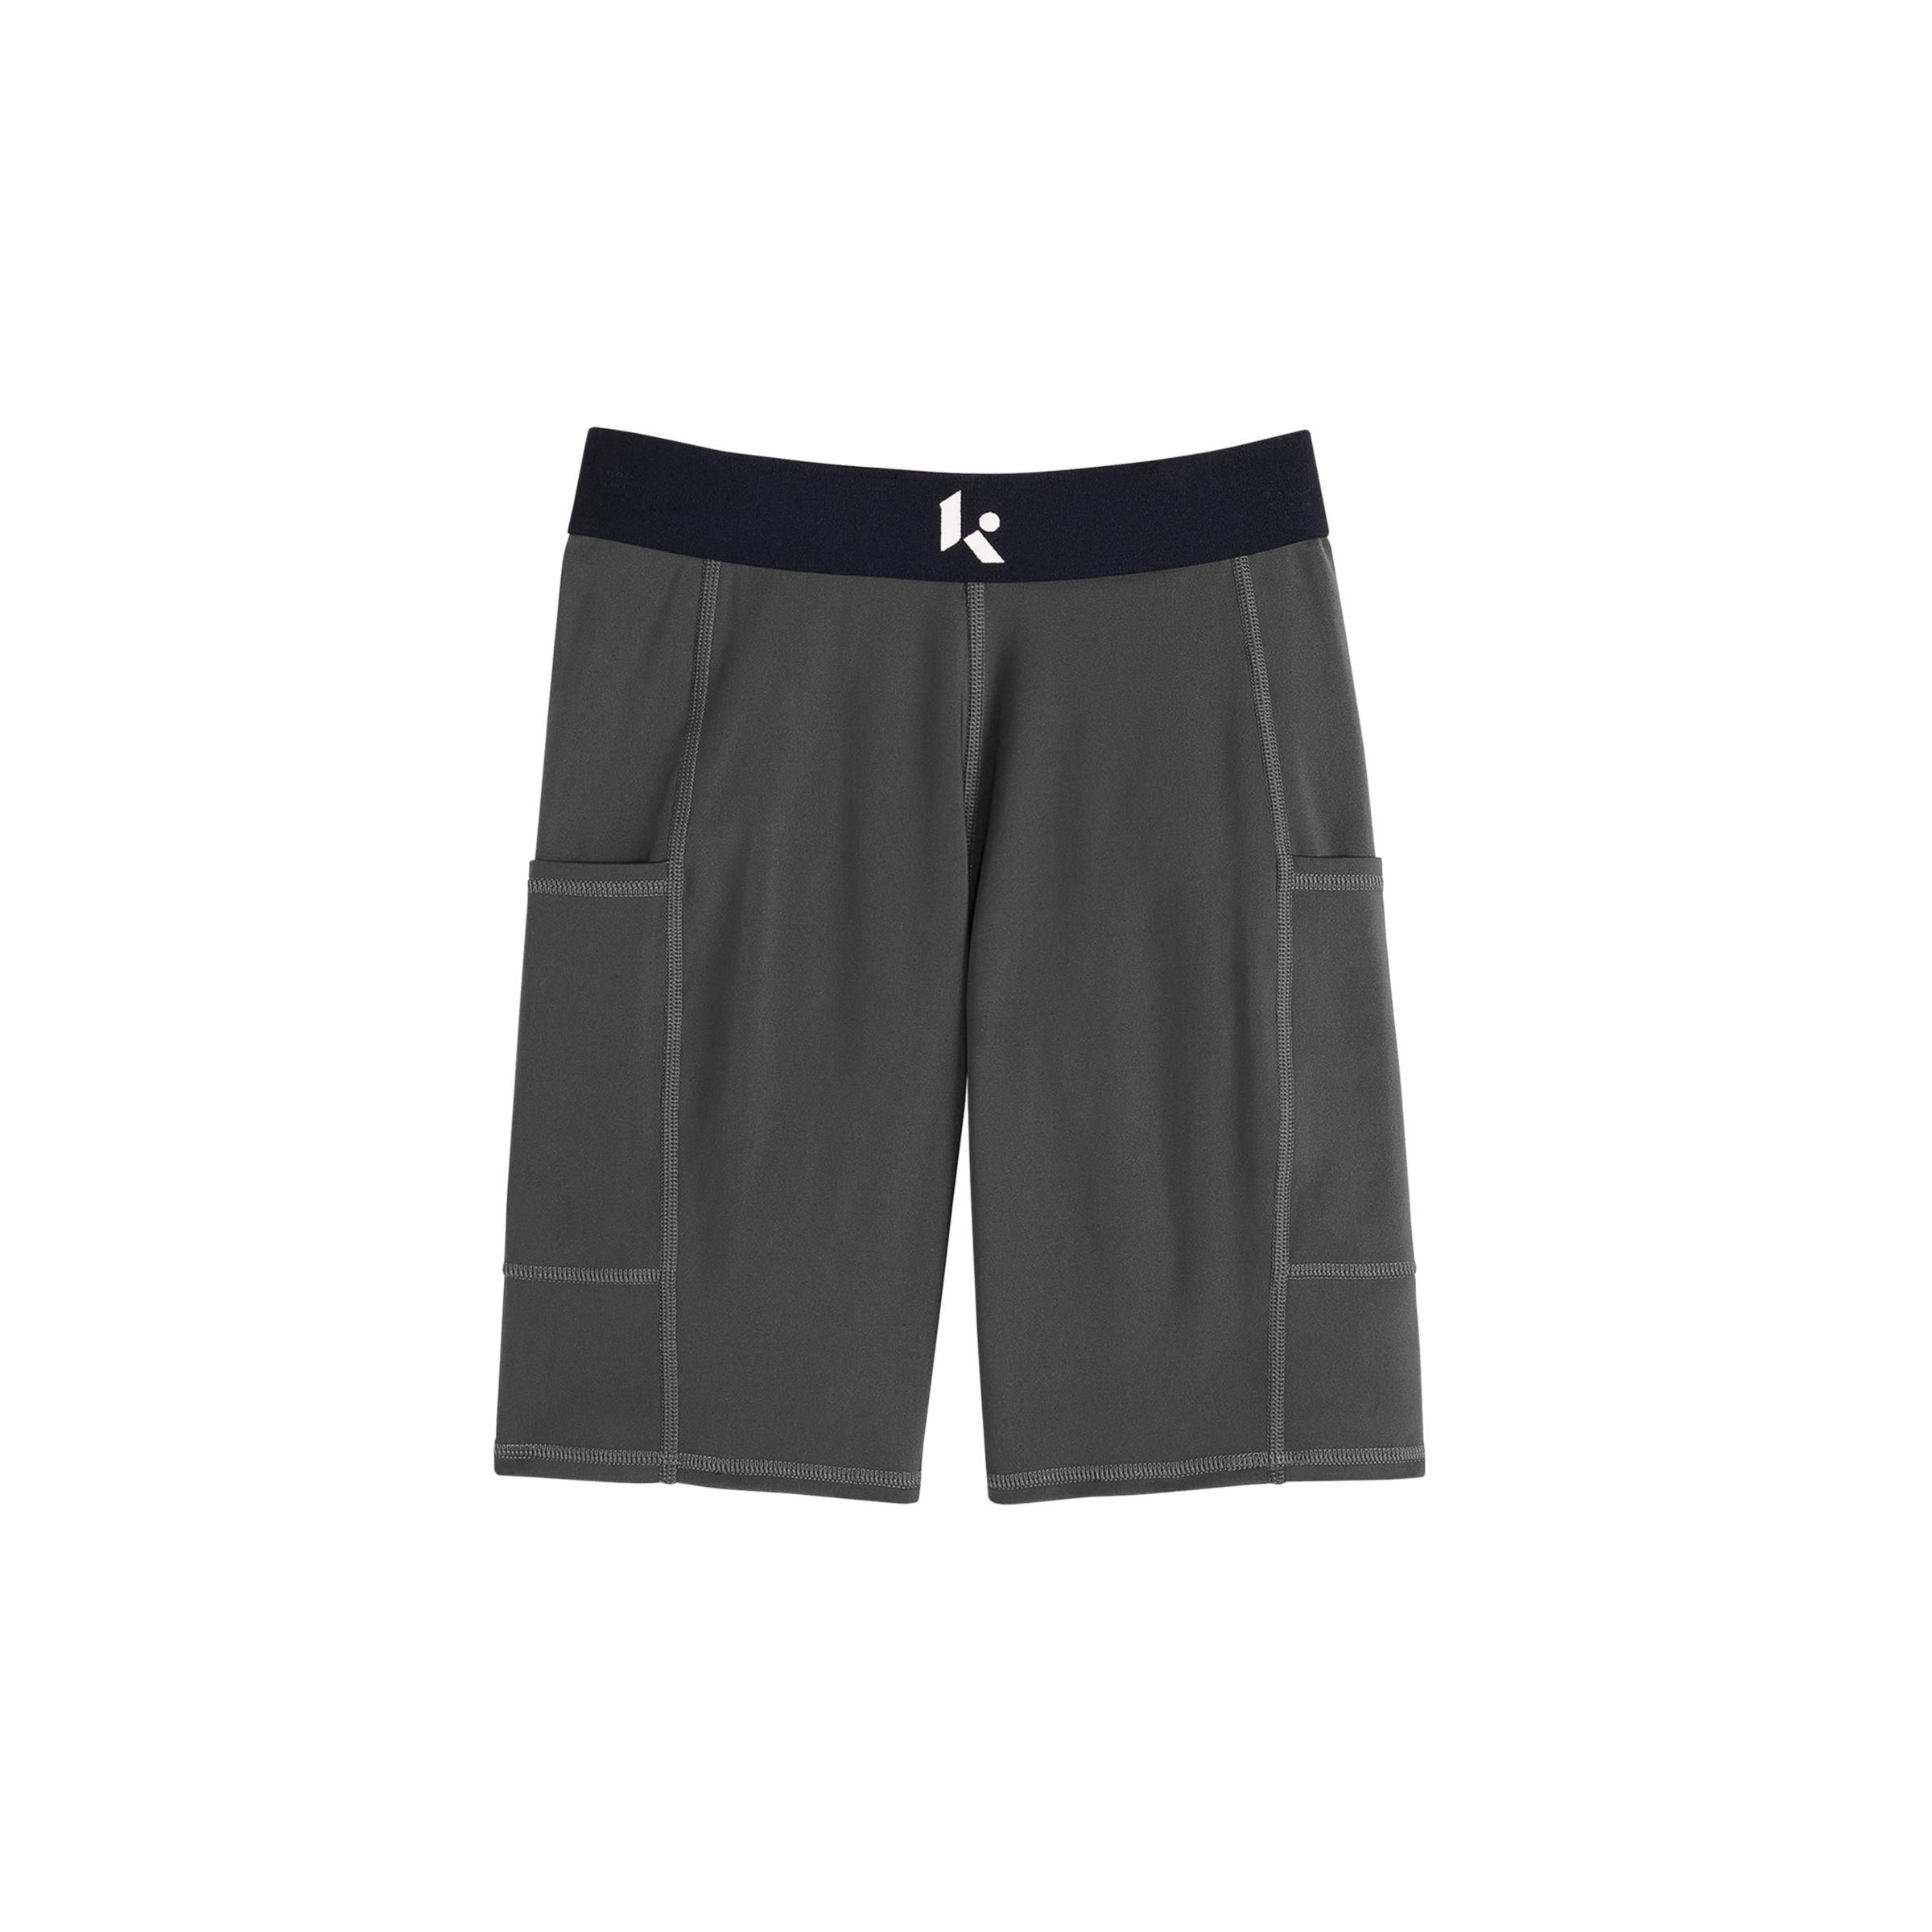 KL2 Nature of the Game Utility Short - New Balance